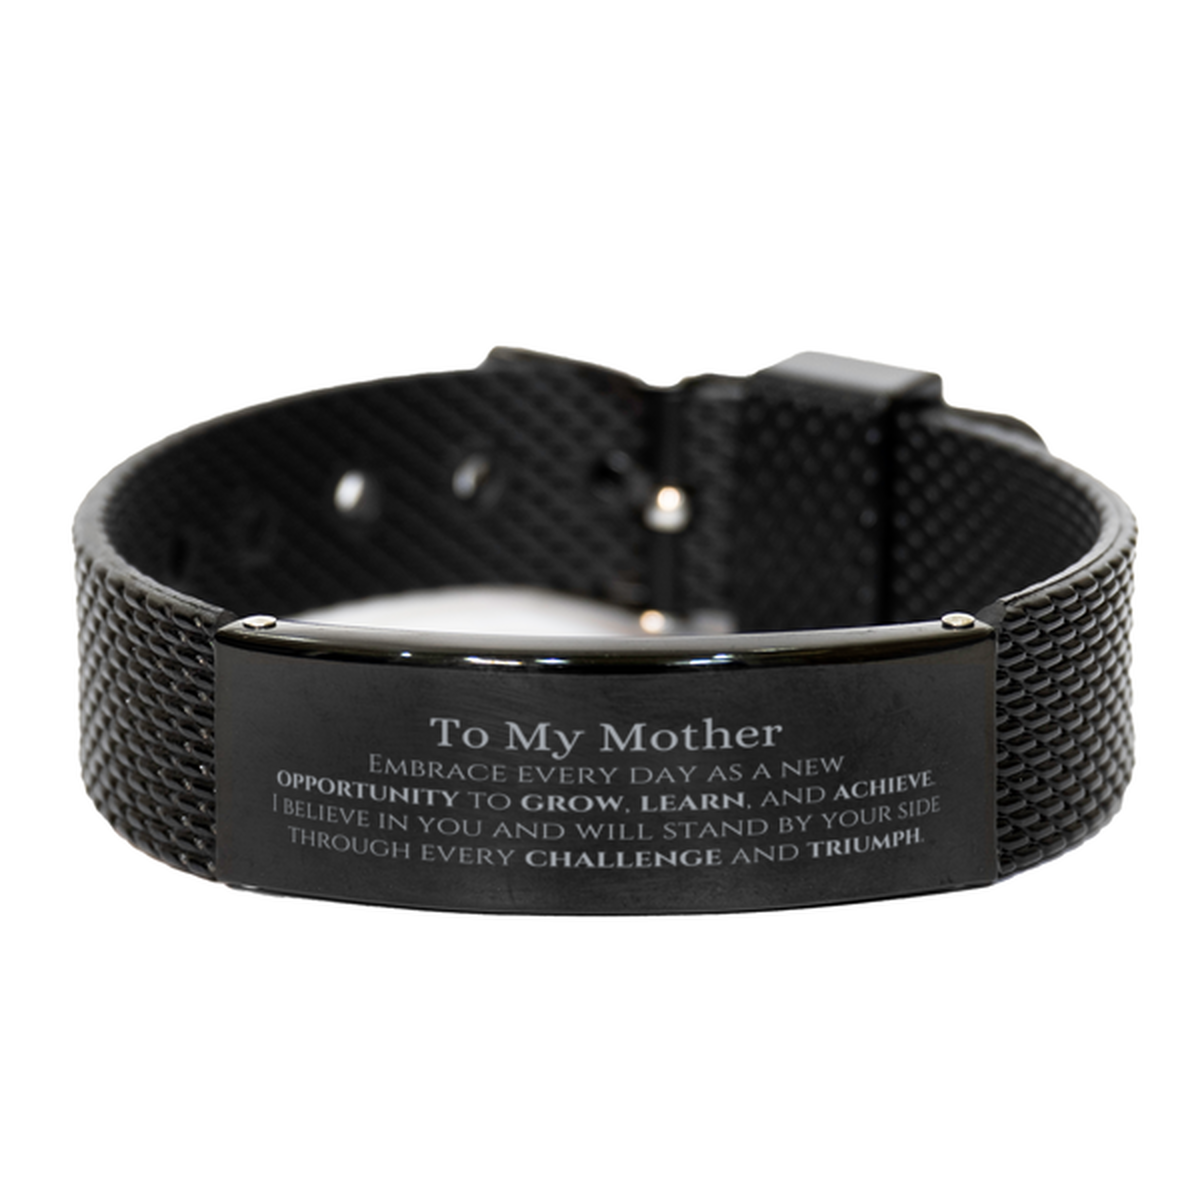 To My Mother Gifts, I believe in you and will stand by your side, Inspirational Black Shark Mesh Bracelet For Mother, Birthday Christmas Motivational Mother Gifts